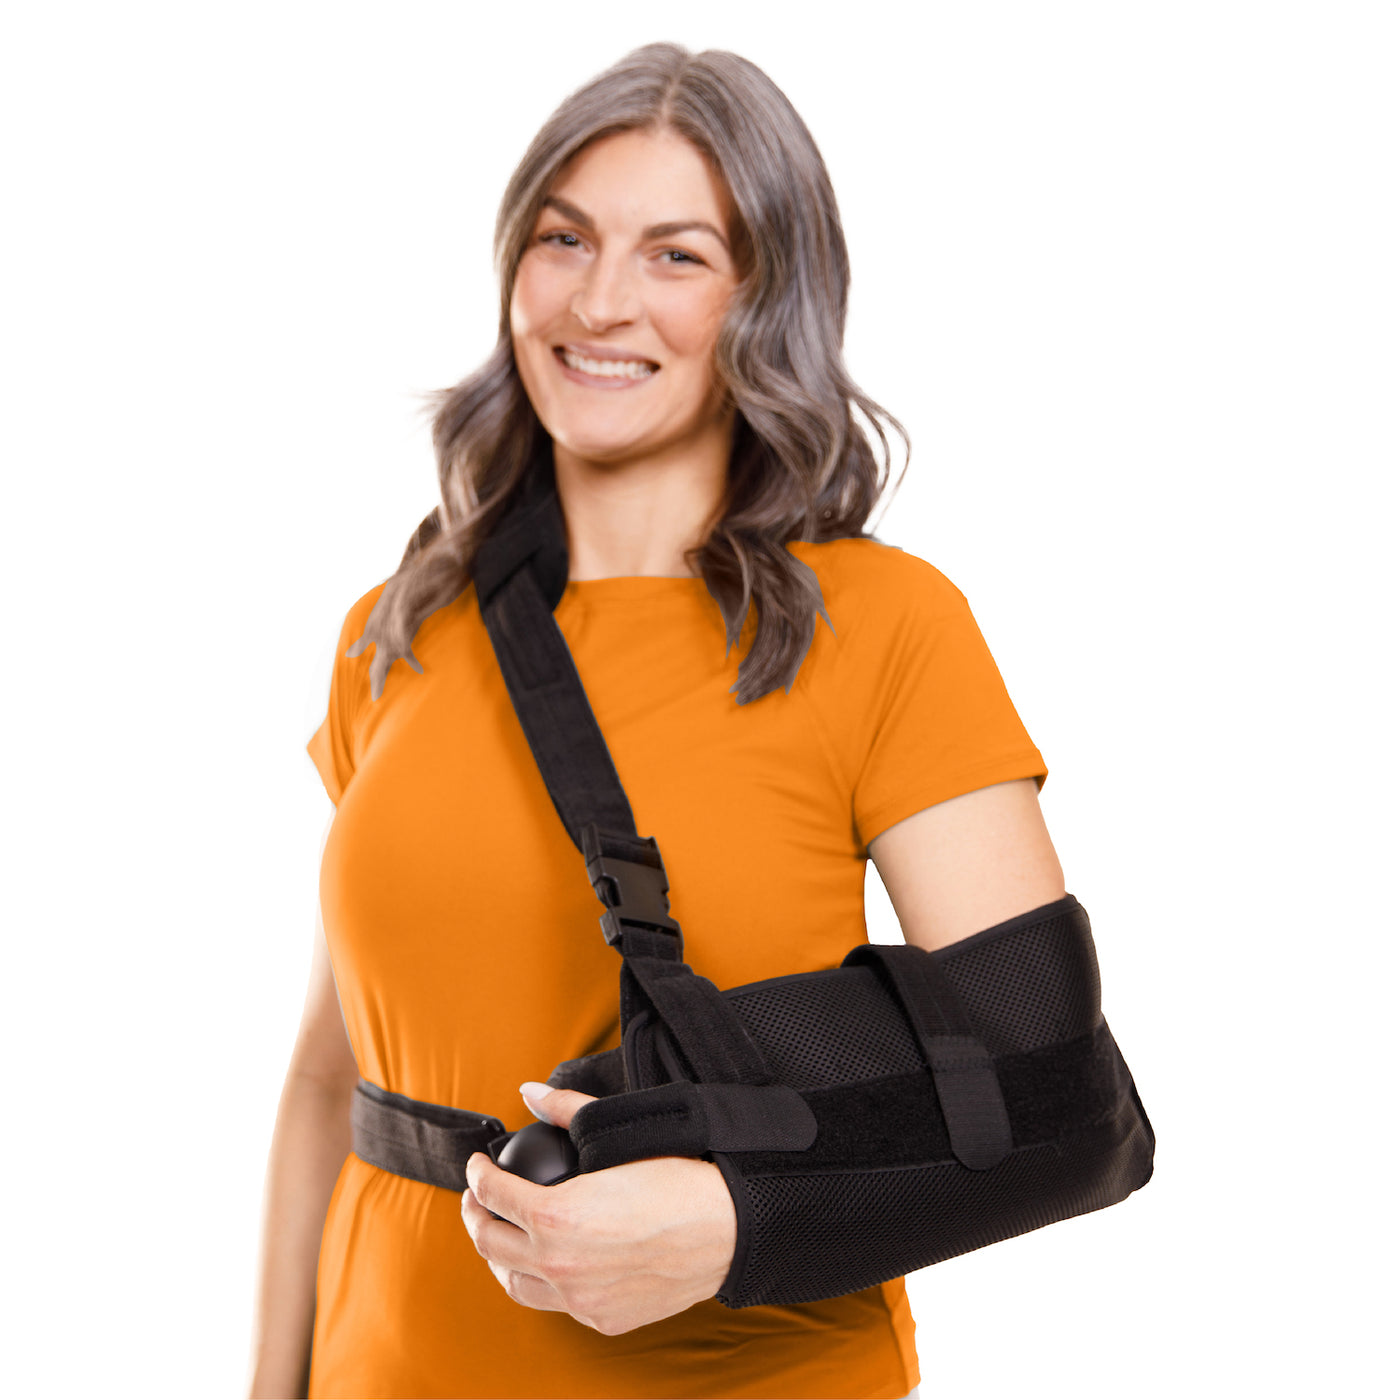 Braceability Abduction Shoulder Sling - Rotator Cuff Immobilizer Brace with Padded Relief Support Wedge and Ball for Right or Left Arm Pain from Post